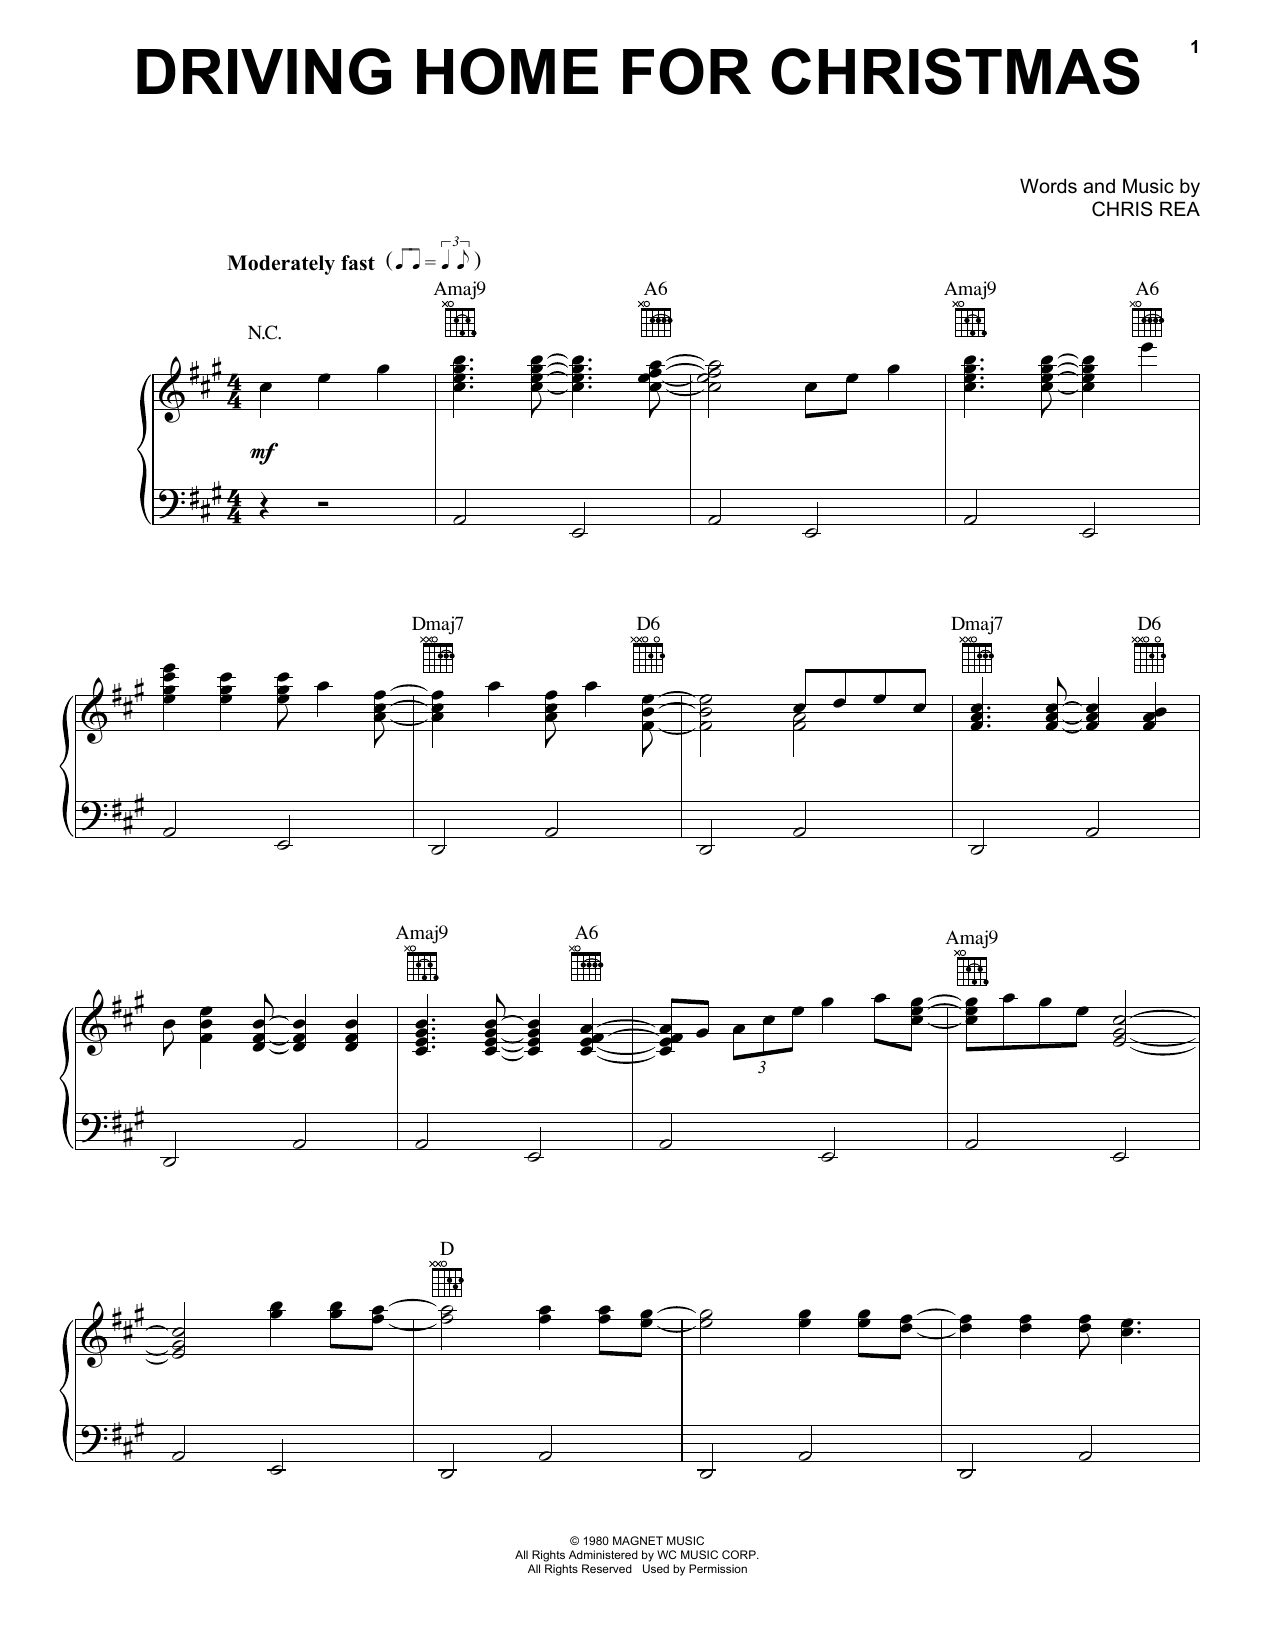 Download Chris Rea Driving Home For Christmas Sheet Music